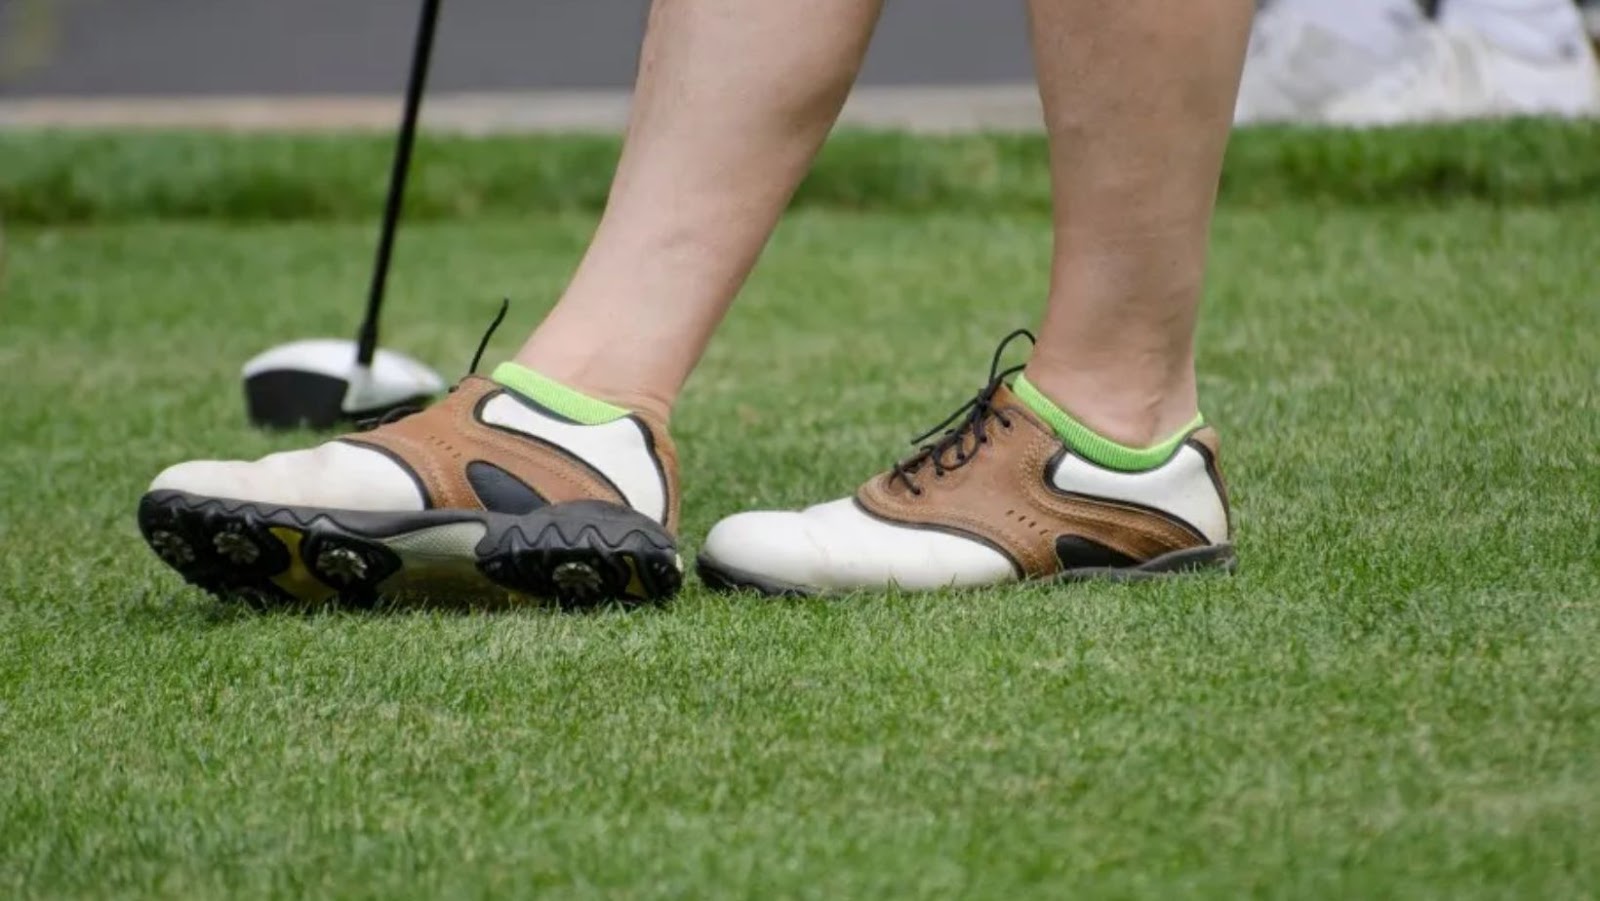 Get a boost on the green with our top-rated golf shoes